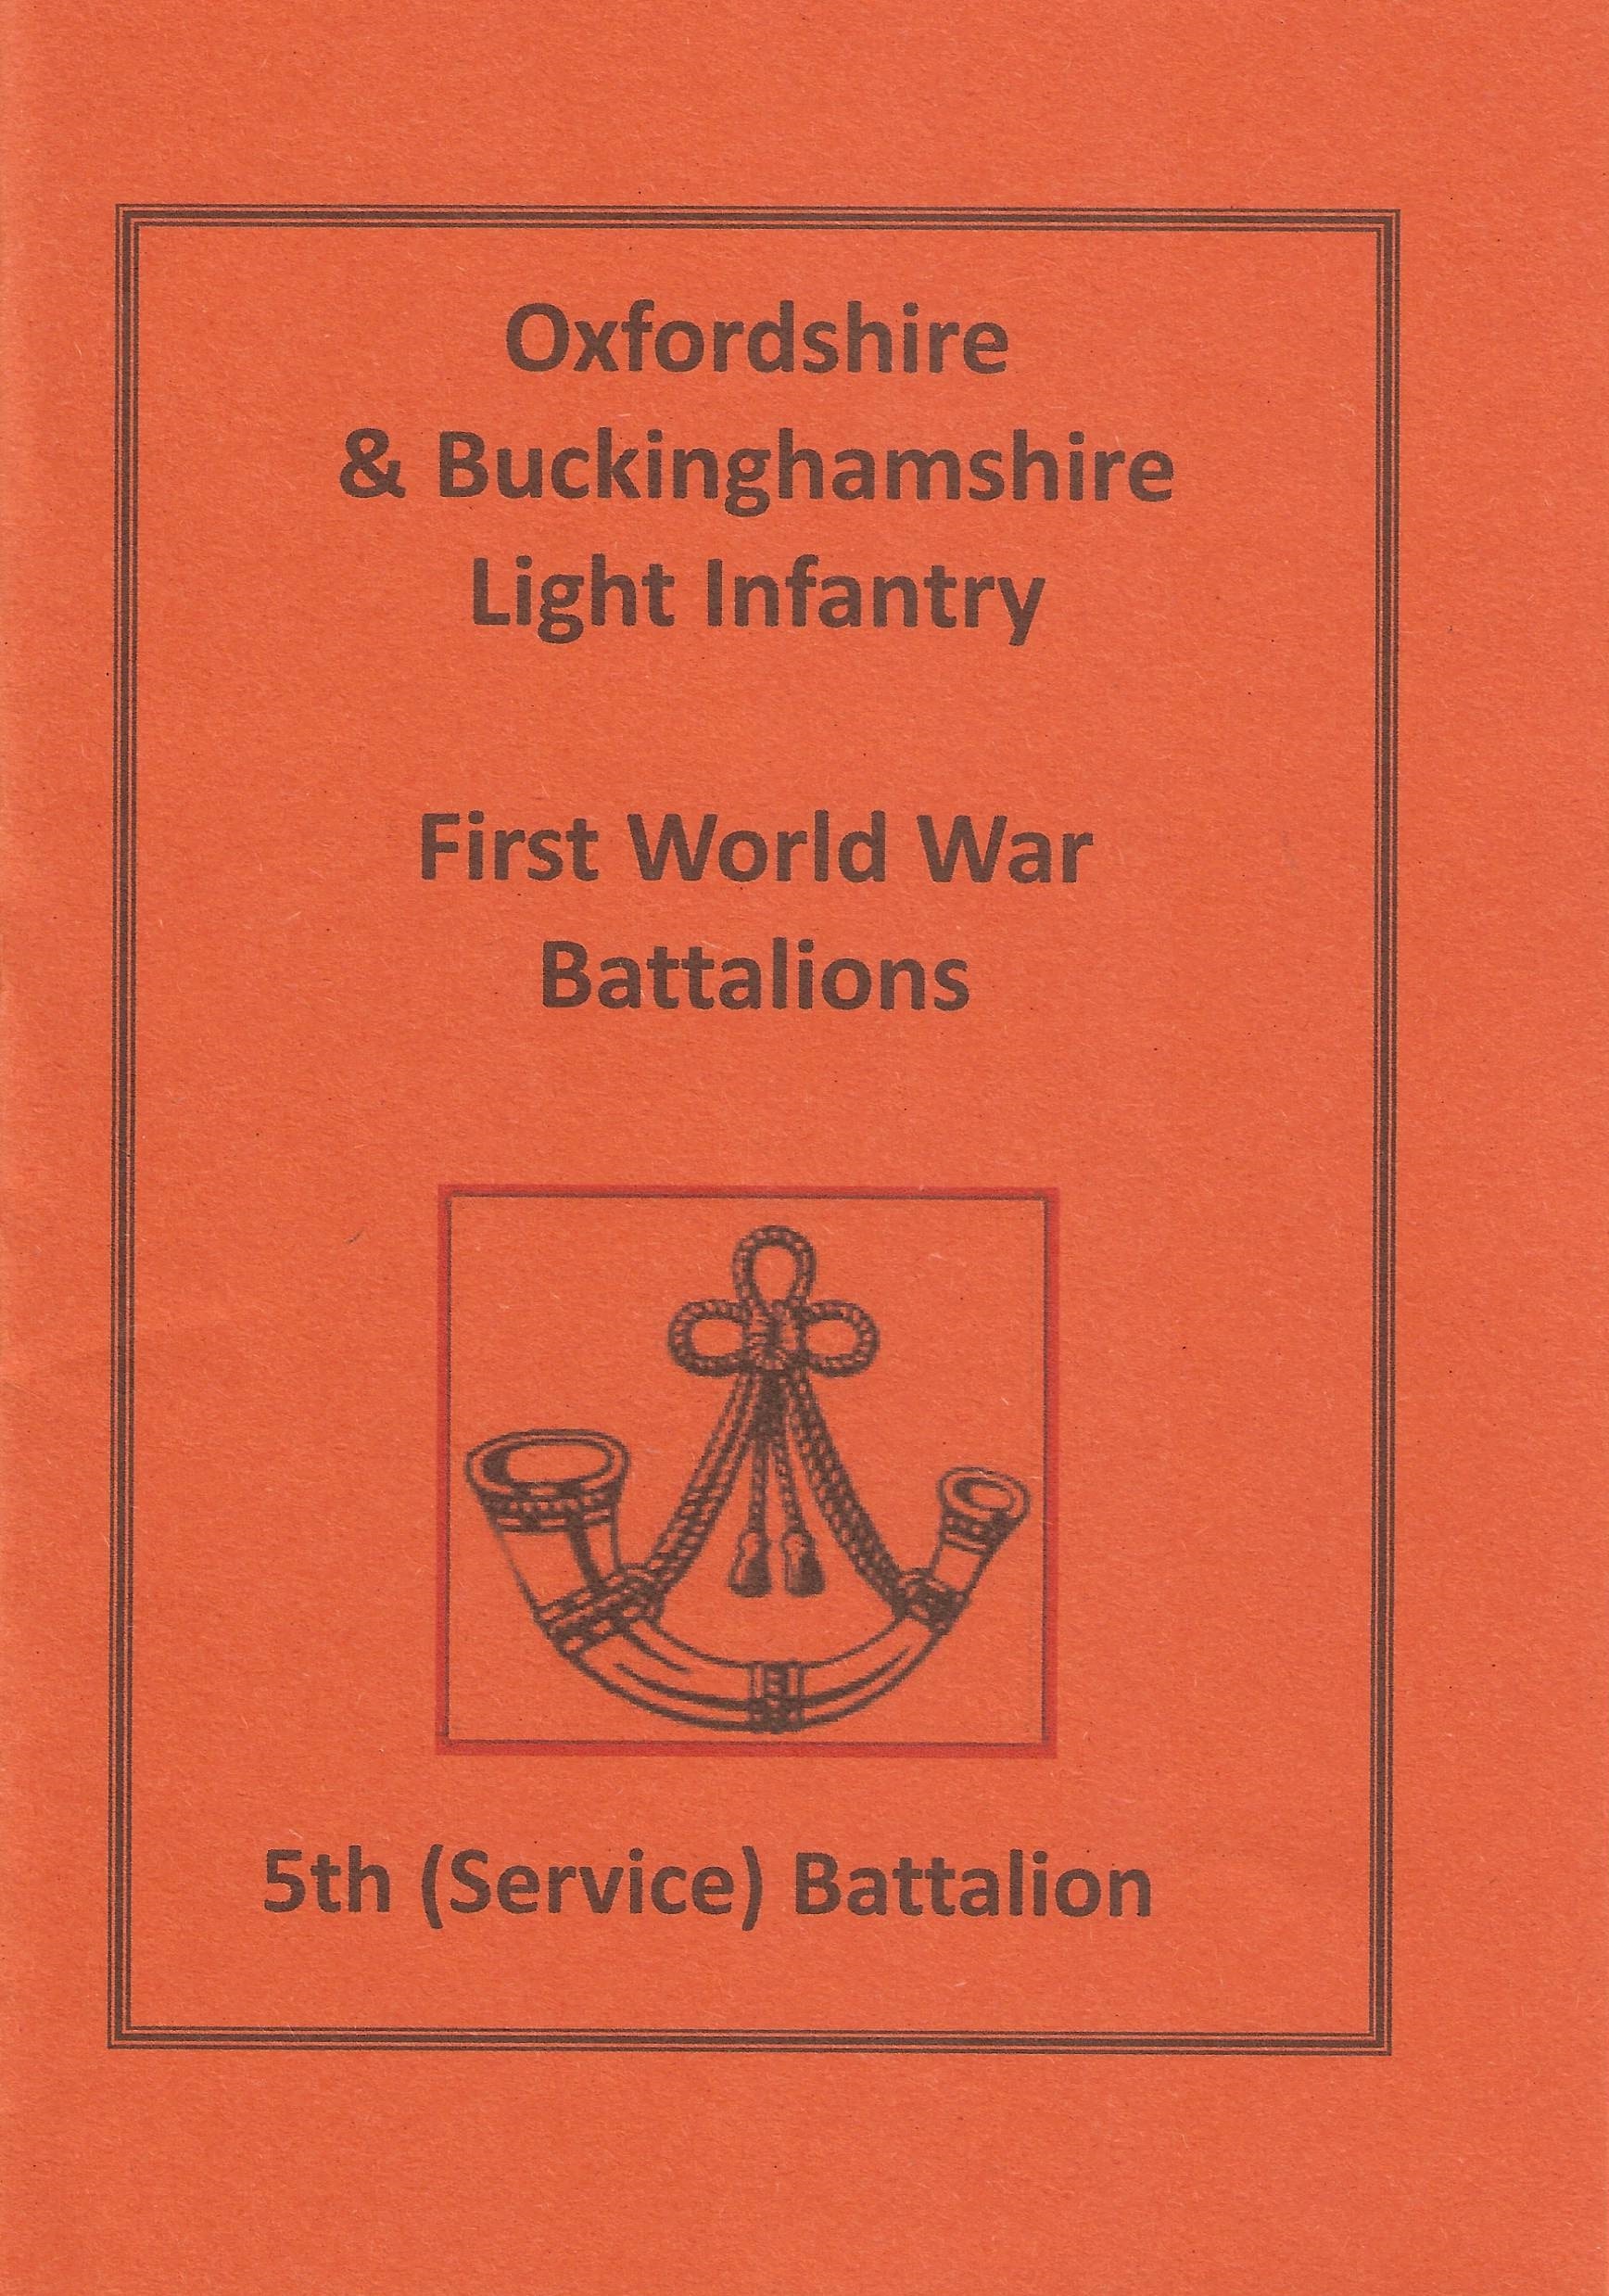 Oxfordshire and Buckinghamshire Light Infantry in WW1: 5th (Service) Battalion